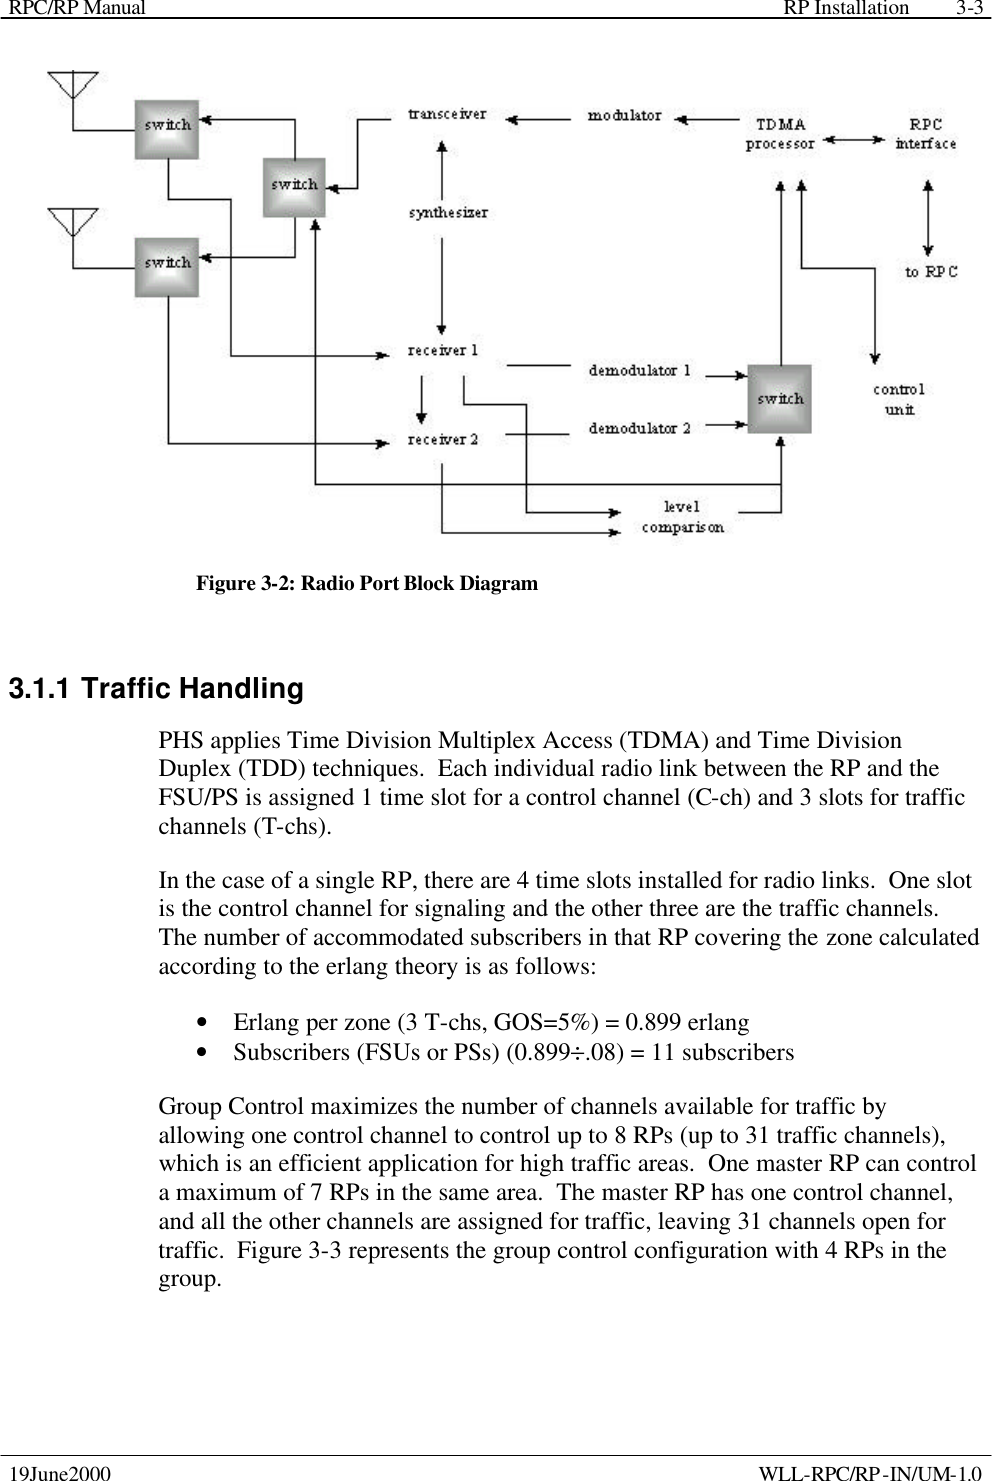 RPC/RP Manual    RP Installation  19June2000    WLL-RPC/RP-IN/UM-1.0 3-3 Figure 3-2: Radio Port Block Diagram 3.1.1 Traffic Handling PHS applies Time Division Multiplex Access (TDMA) and Time Division Duplex (TDD) techniques.  Each individual radio link between the RP and the FSU/PS is assigned 1 time slot for a control channel (C-ch) and 3 slots for traffic channels (T-chs). In the case of a single RP, there are 4 time slots installed for radio links.  One slot is the control channel for signaling and the other three are the traffic channels.  The number of accommodated subscribers in that RP covering the zone calculated according to the erlang theory is as follows:  • Erlang per zone (3 T-chs, GOS=5%) = 0.899 erlang • Subscribers (FSUs or PSs) (0.899÷.08) = 11 subscribers Group Control maximizes the number of channels available for traffic by allowing one control channel to control up to 8 RPs (up to 31 traffic channels), which is an efficient application for high traffic areas.  One master RP can control a maximum of 7 RPs in the same area.  The master RP has one control channel, and all the other channels are assigned for traffic, leaving 31 channels open for traffic.  Figure 3-3 represents the group control configuration with 4 RPs in the group. 